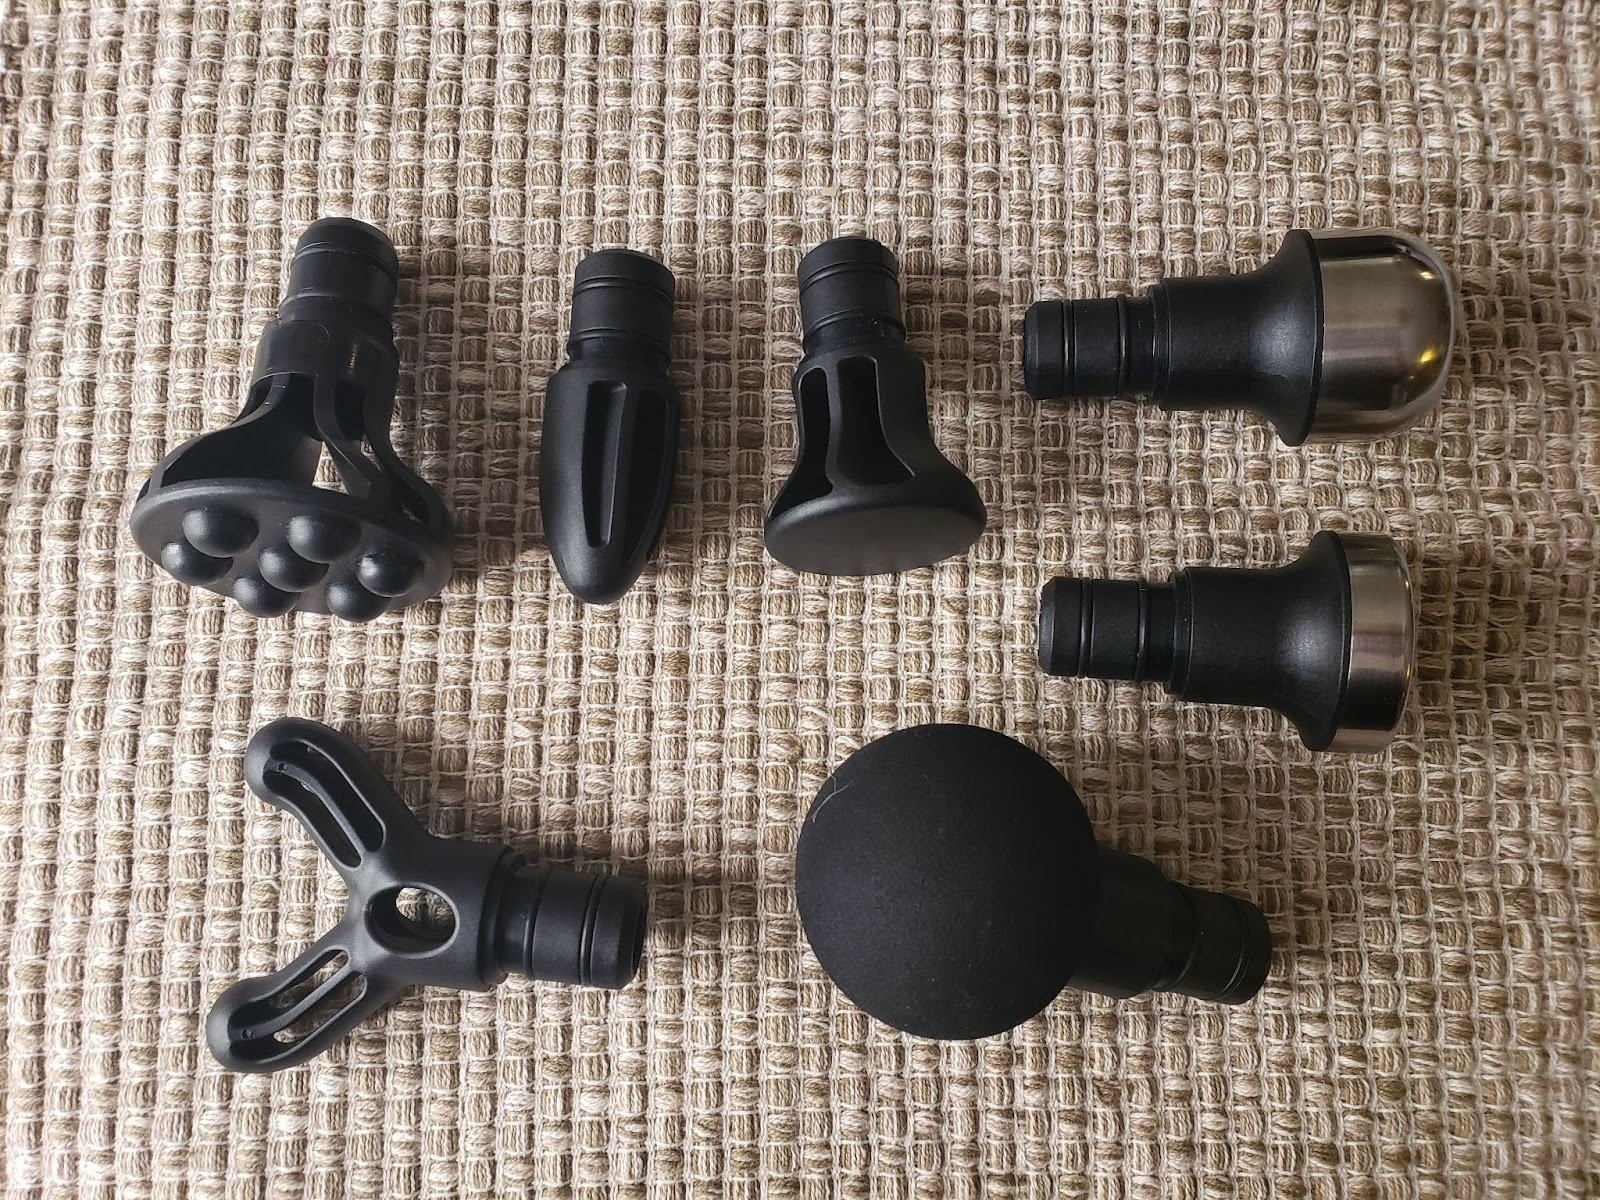 seven attachment heads of varying shapes